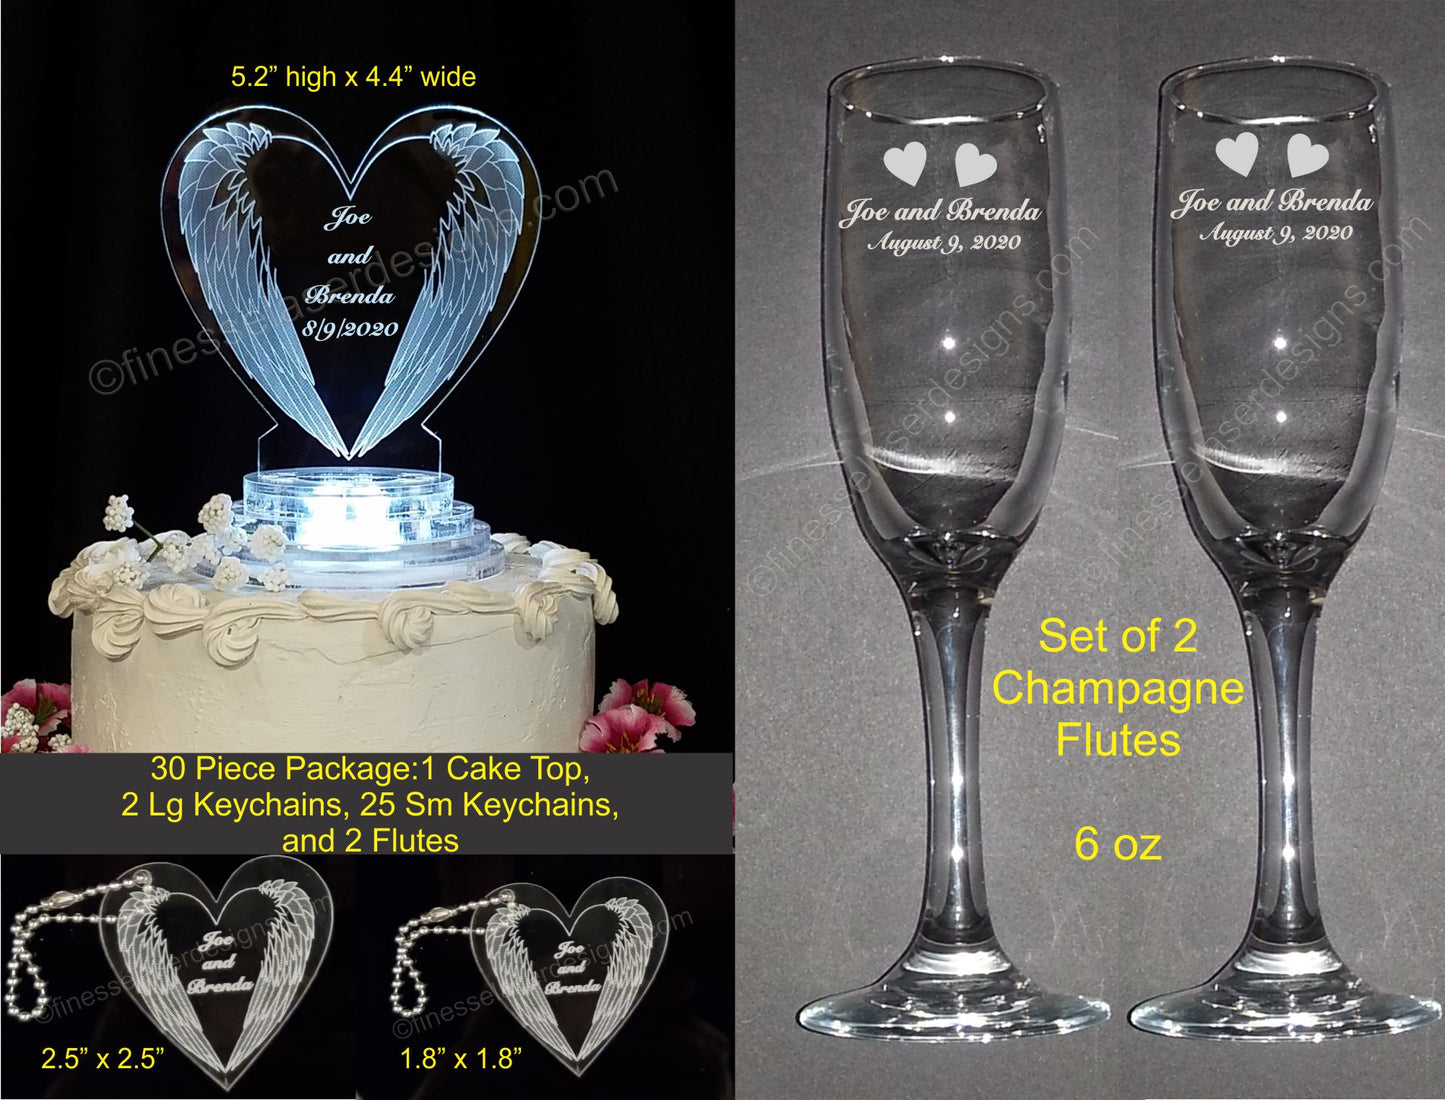 photo showing wedding package that includes a heart shaped cake topper designed with downward angel wings, 2 sizes of matching keychain favors and a set of 2 champagne flutes with dimensions and information